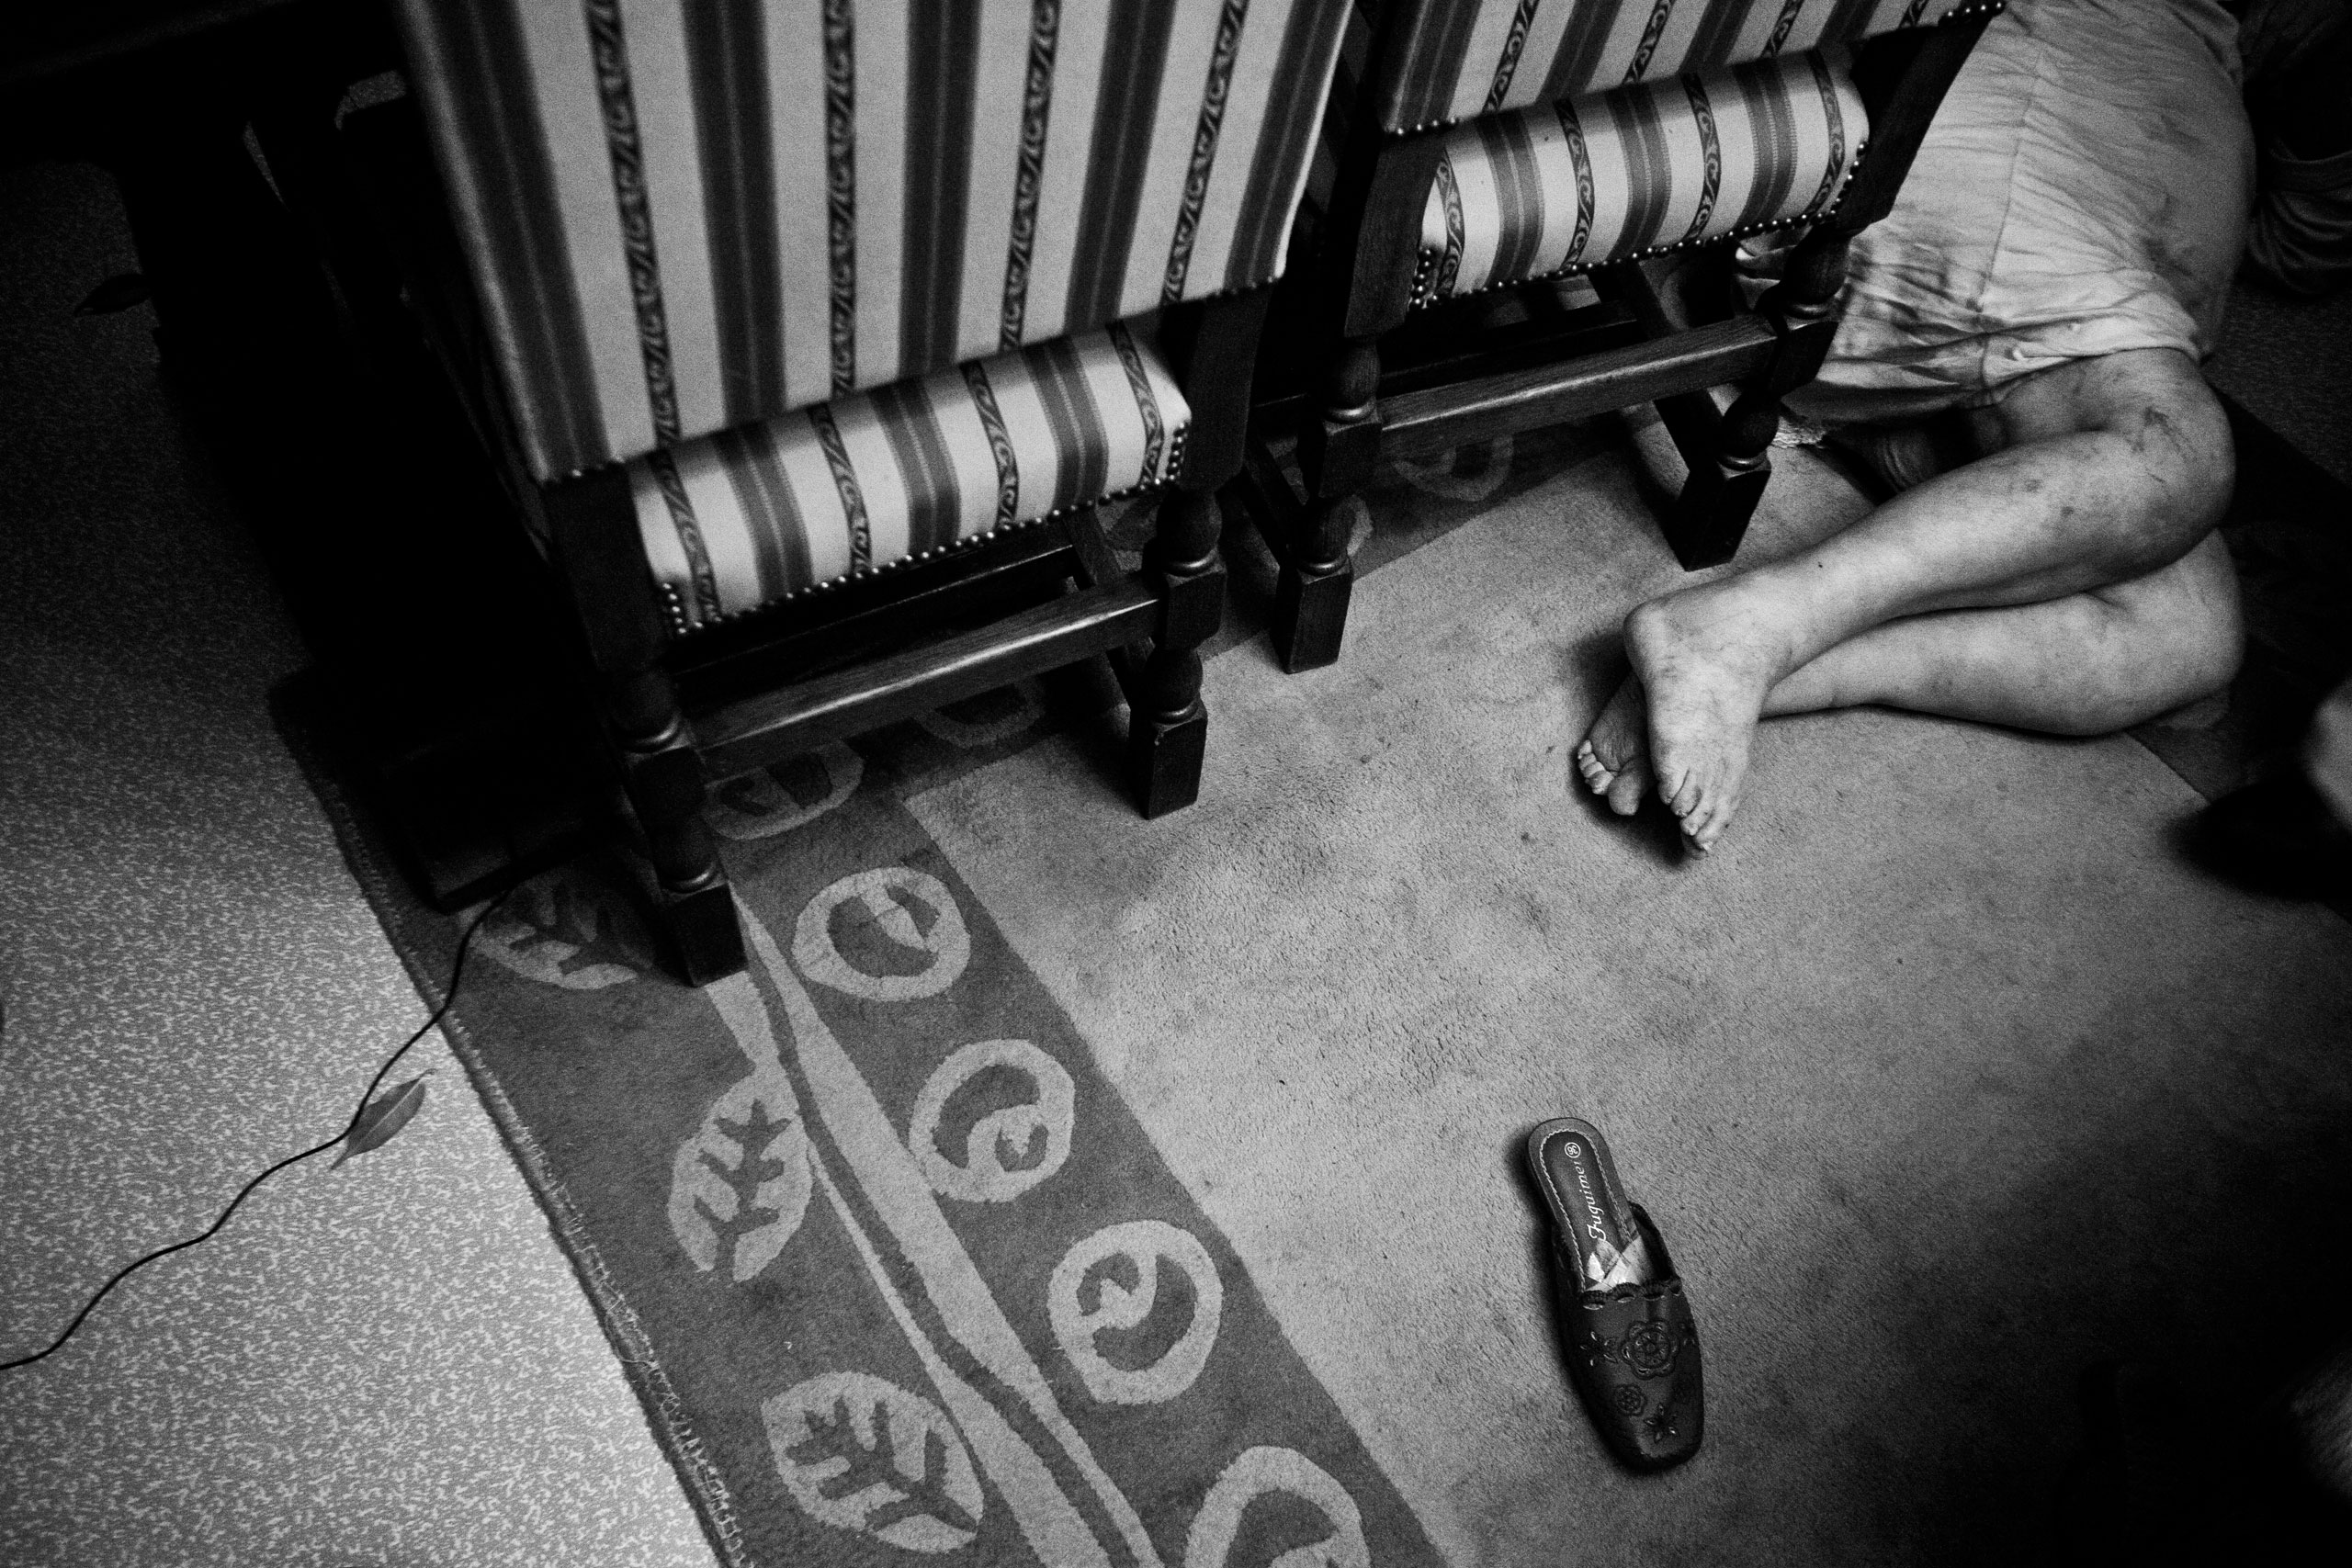 An old woman lays on the floor of her apartment in Molenbeek, Belgium, Feb. 25, 2010. The police was called for an unresponsive old woman, who fell from a chair and couldn't wake up.